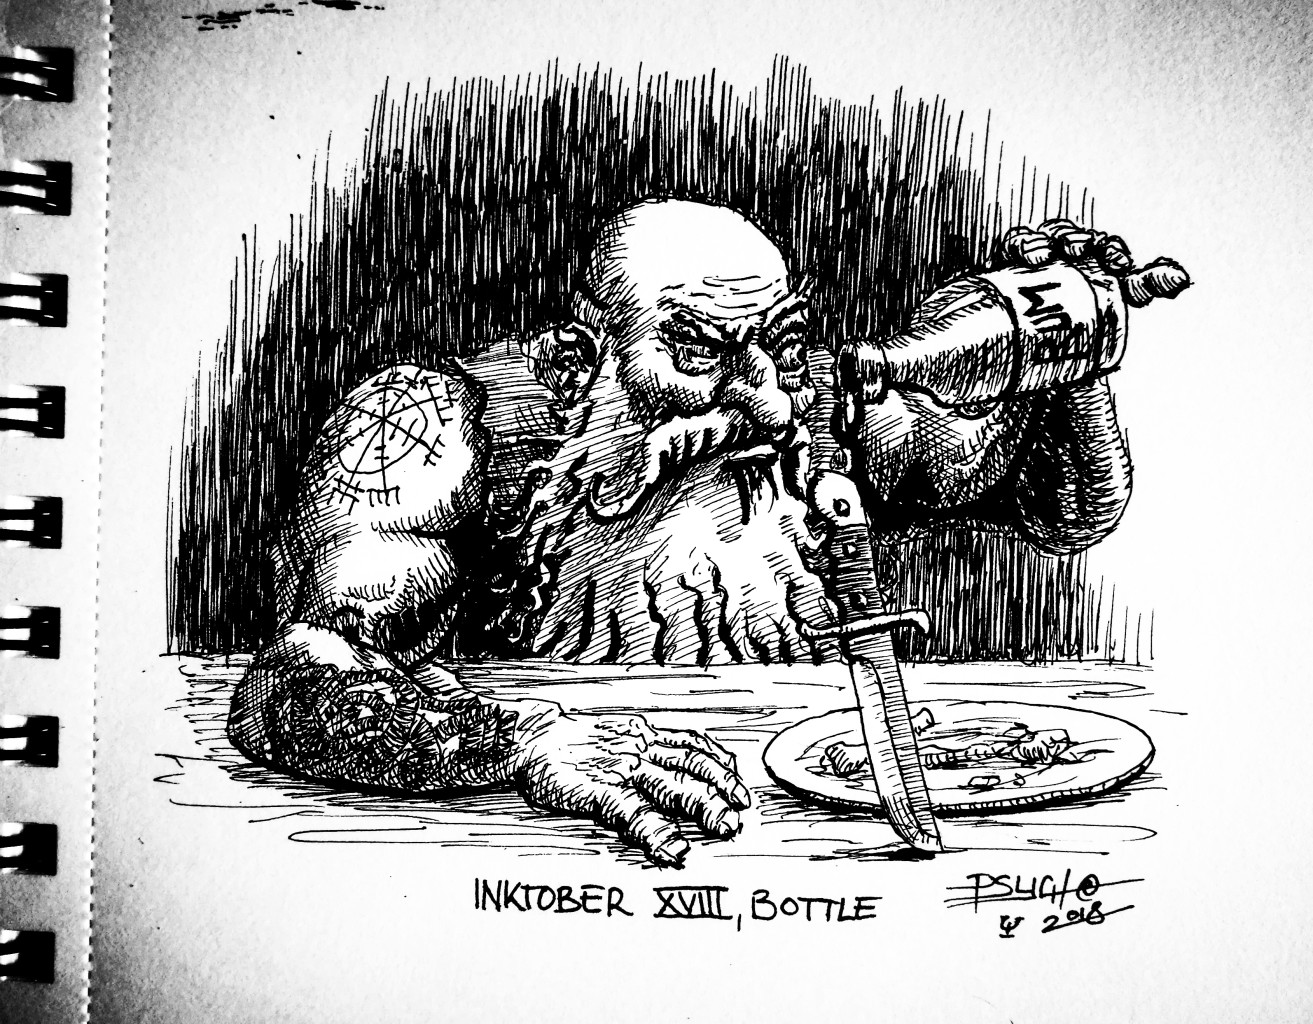 Dwarf is not happy about his rum "Bottle" running dry.